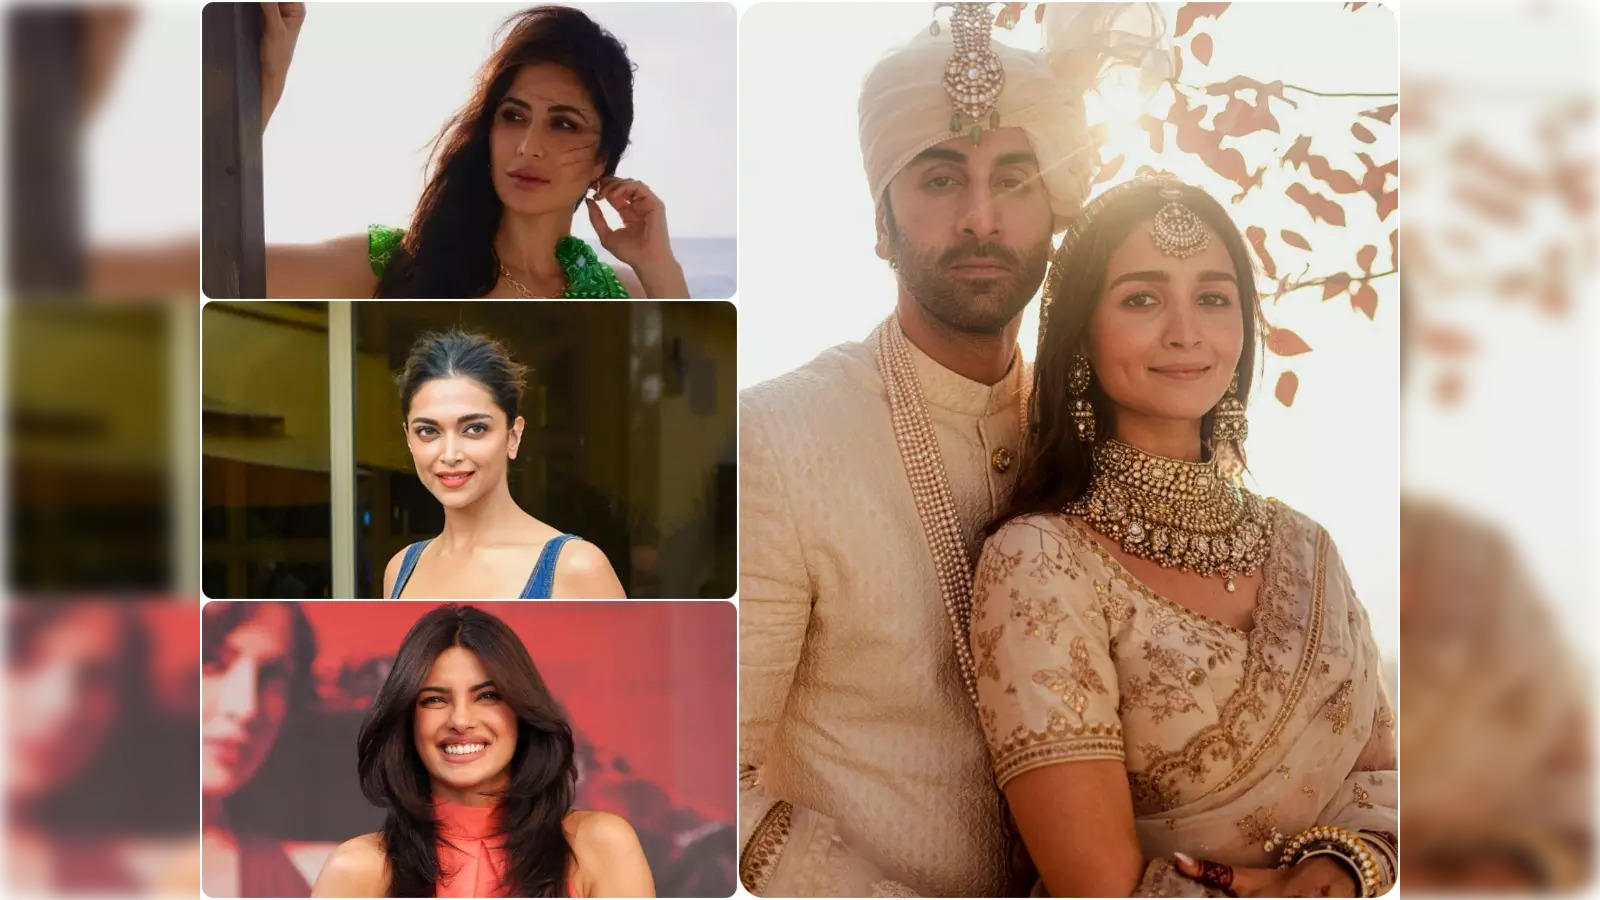 Mother's Day 2022: Vicky Kaushal shares UNSEEN pics with mom from Katrina  Kaif and his wedding album